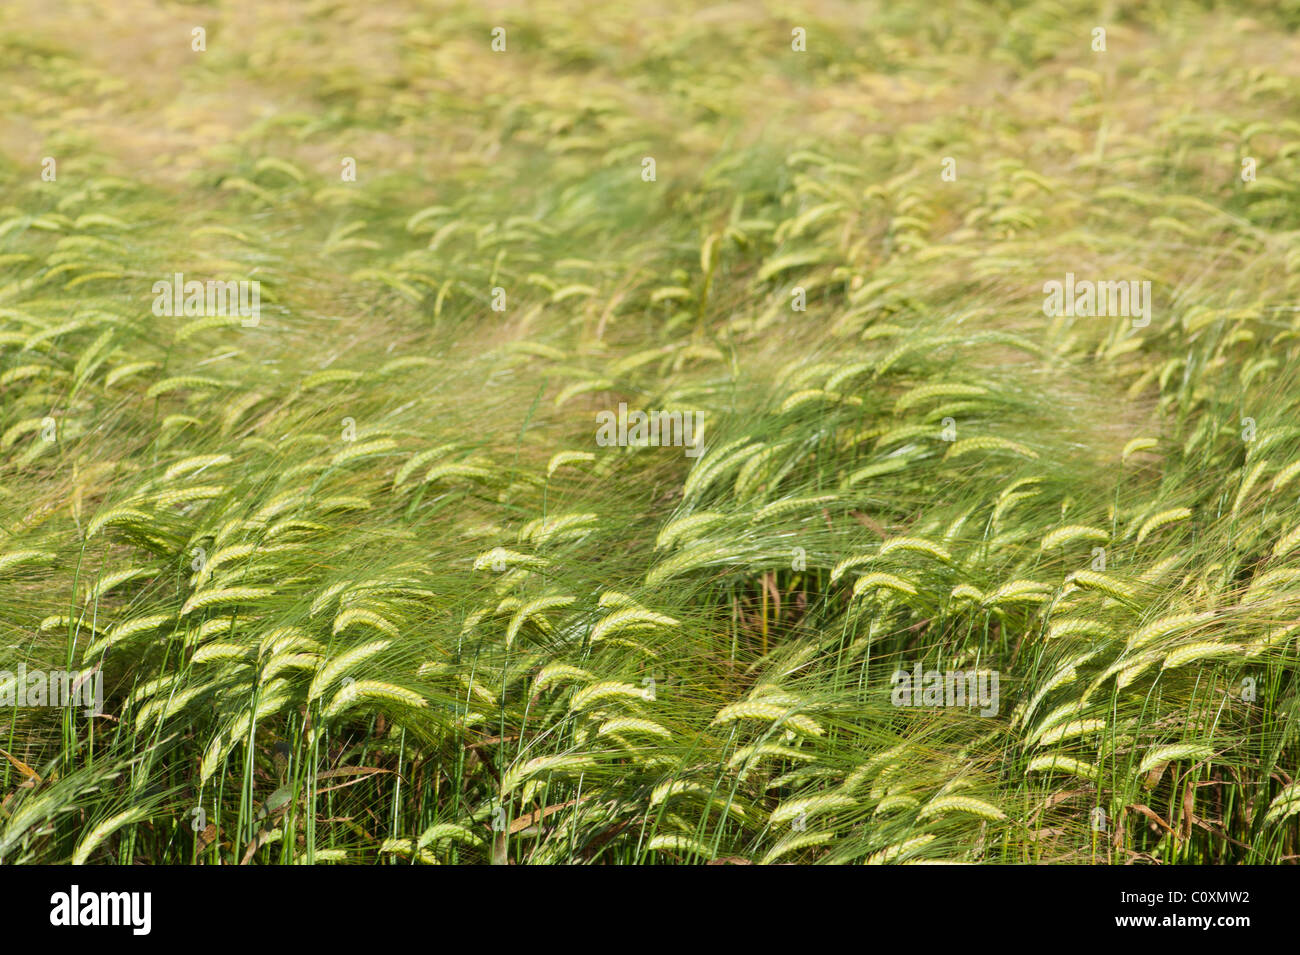 Green wheat field background. Copyspace in upper blurred part. Focus on lower plants. Stock Photo